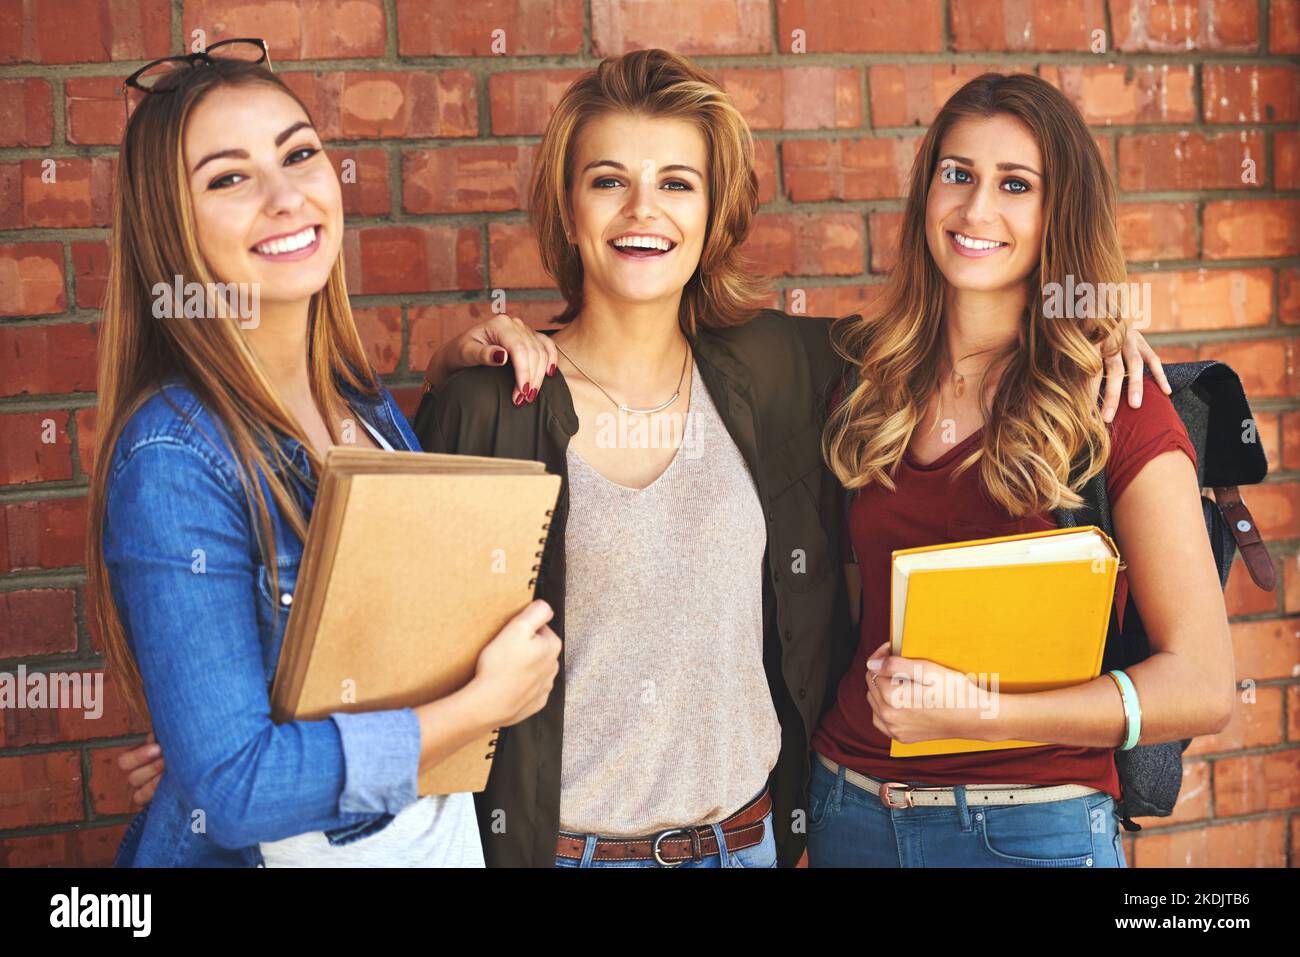 Their friendship will last long after college. Portrait of a group of smiling female university students standing together on campus. Stock Photo